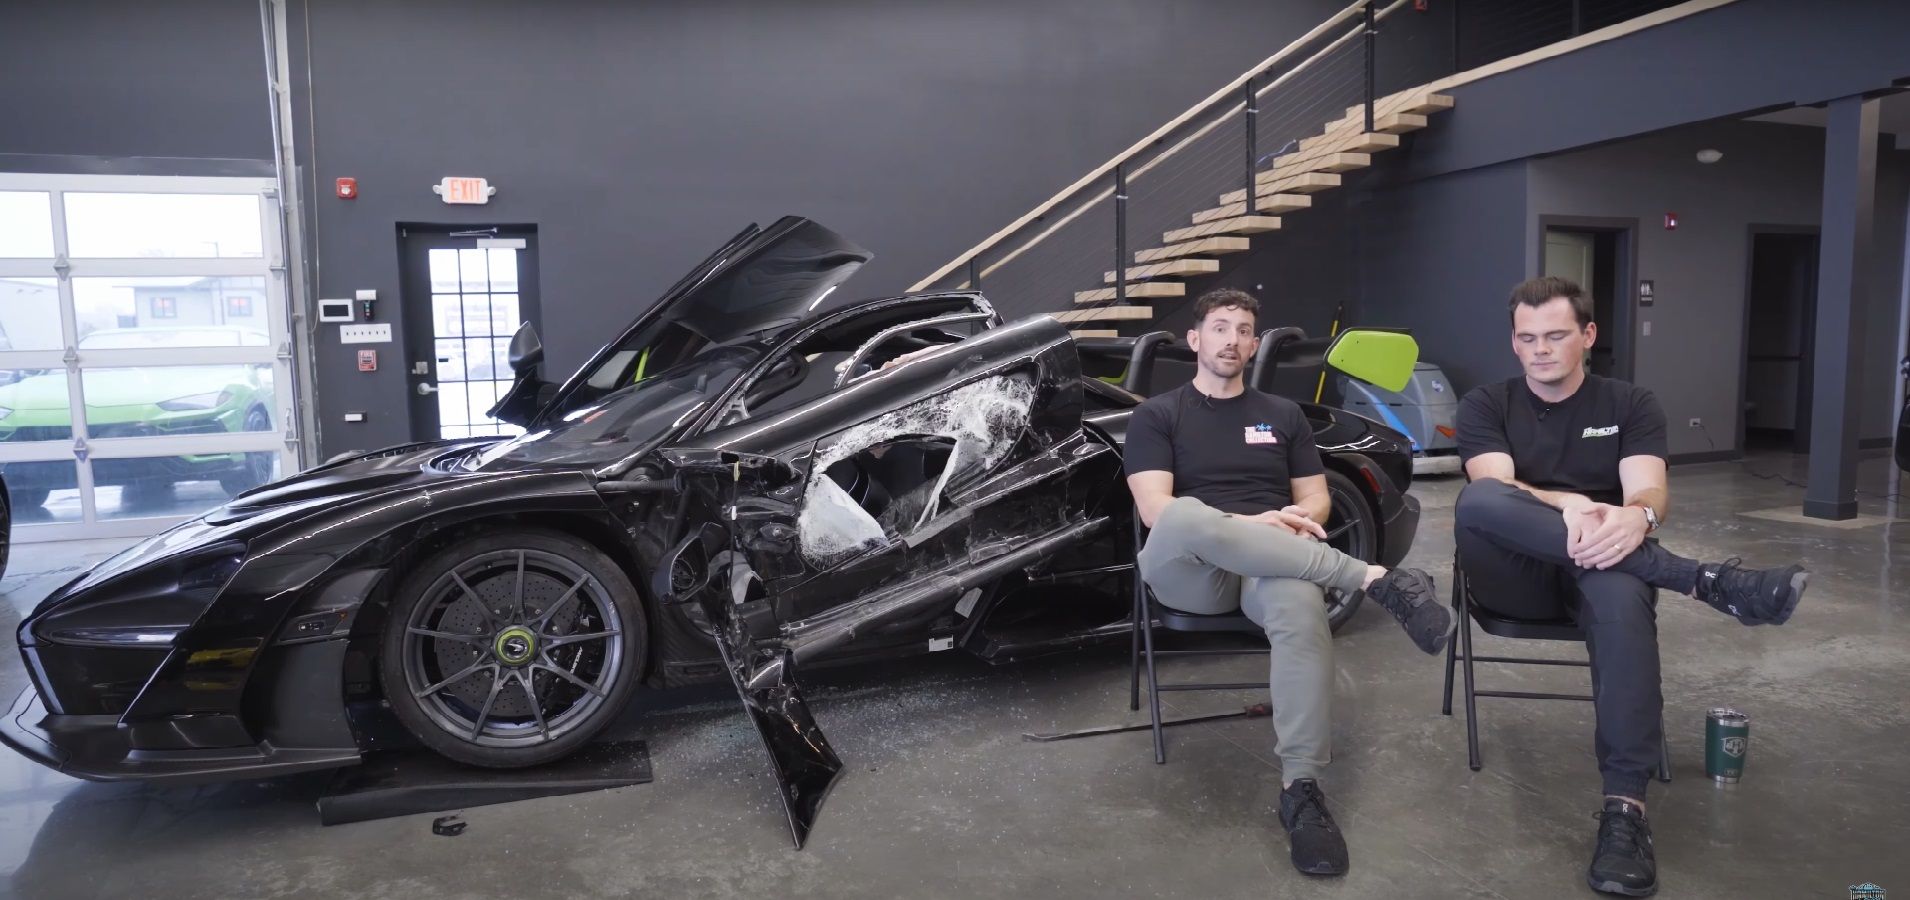 Wrecked McLaren Senna from the Hamilton Collection with owner and caretaker